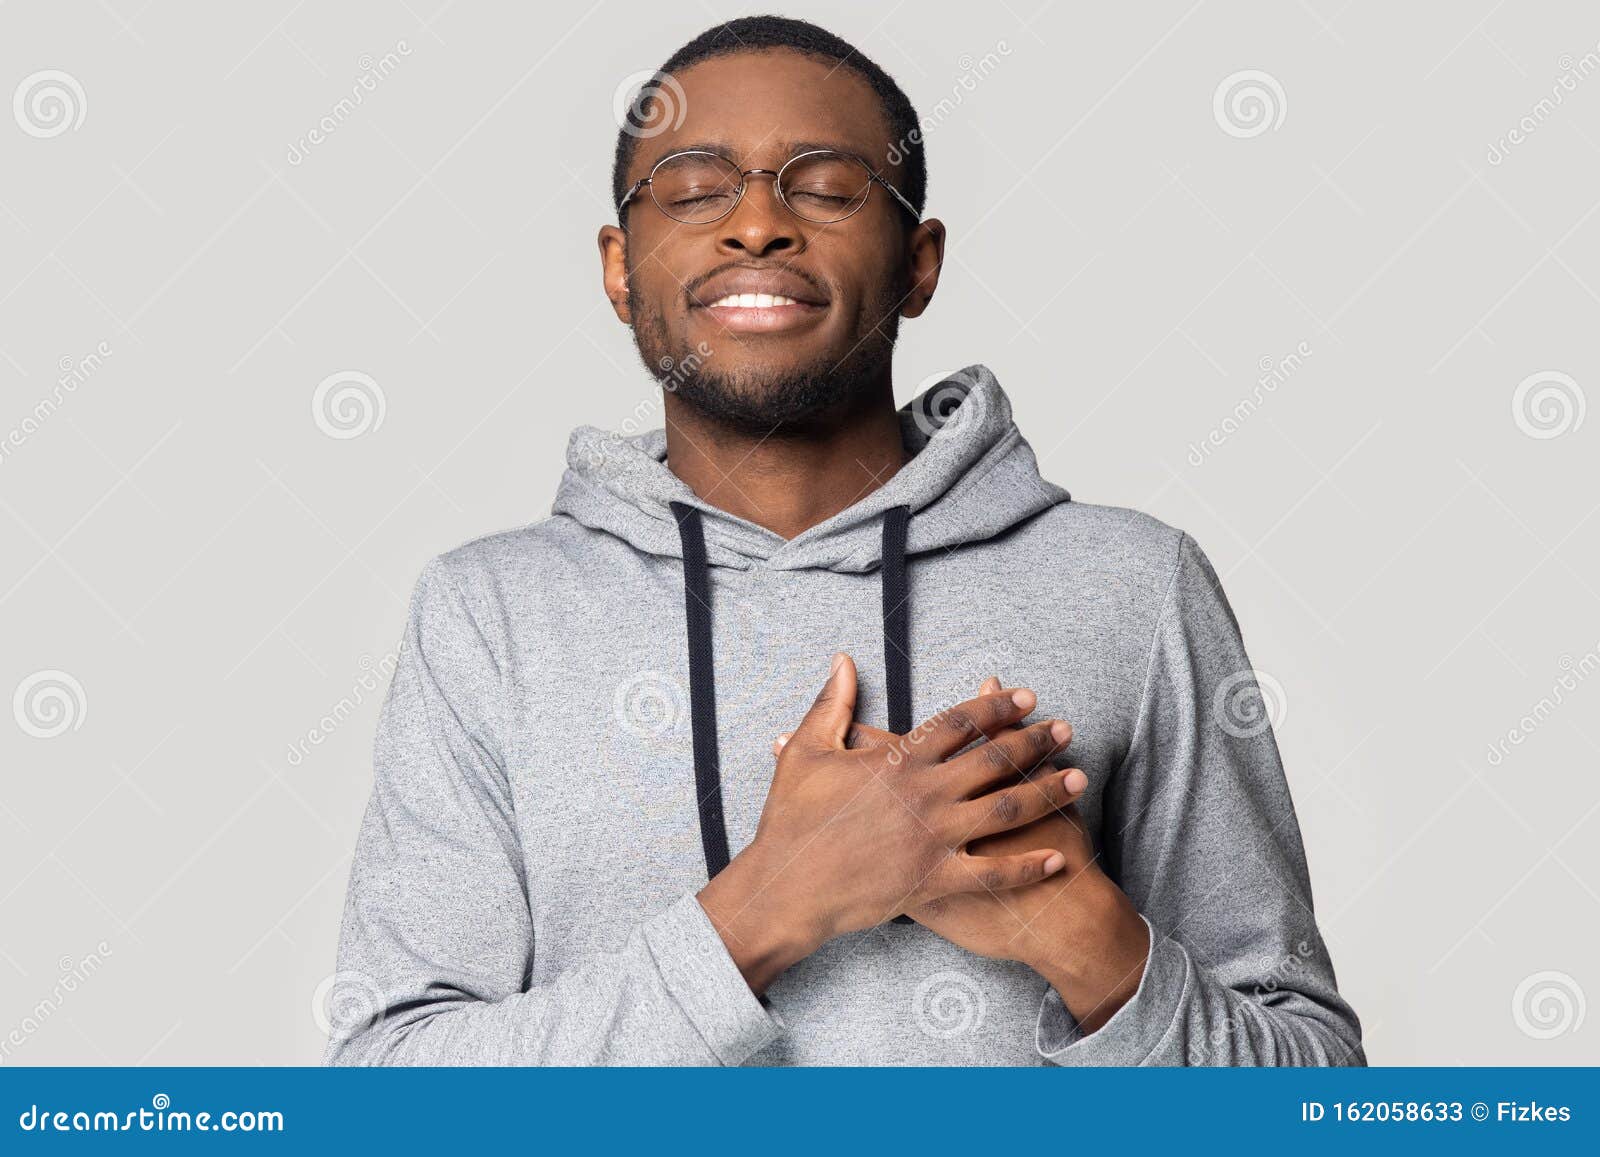 head shot grateful african american man holding hands on chest